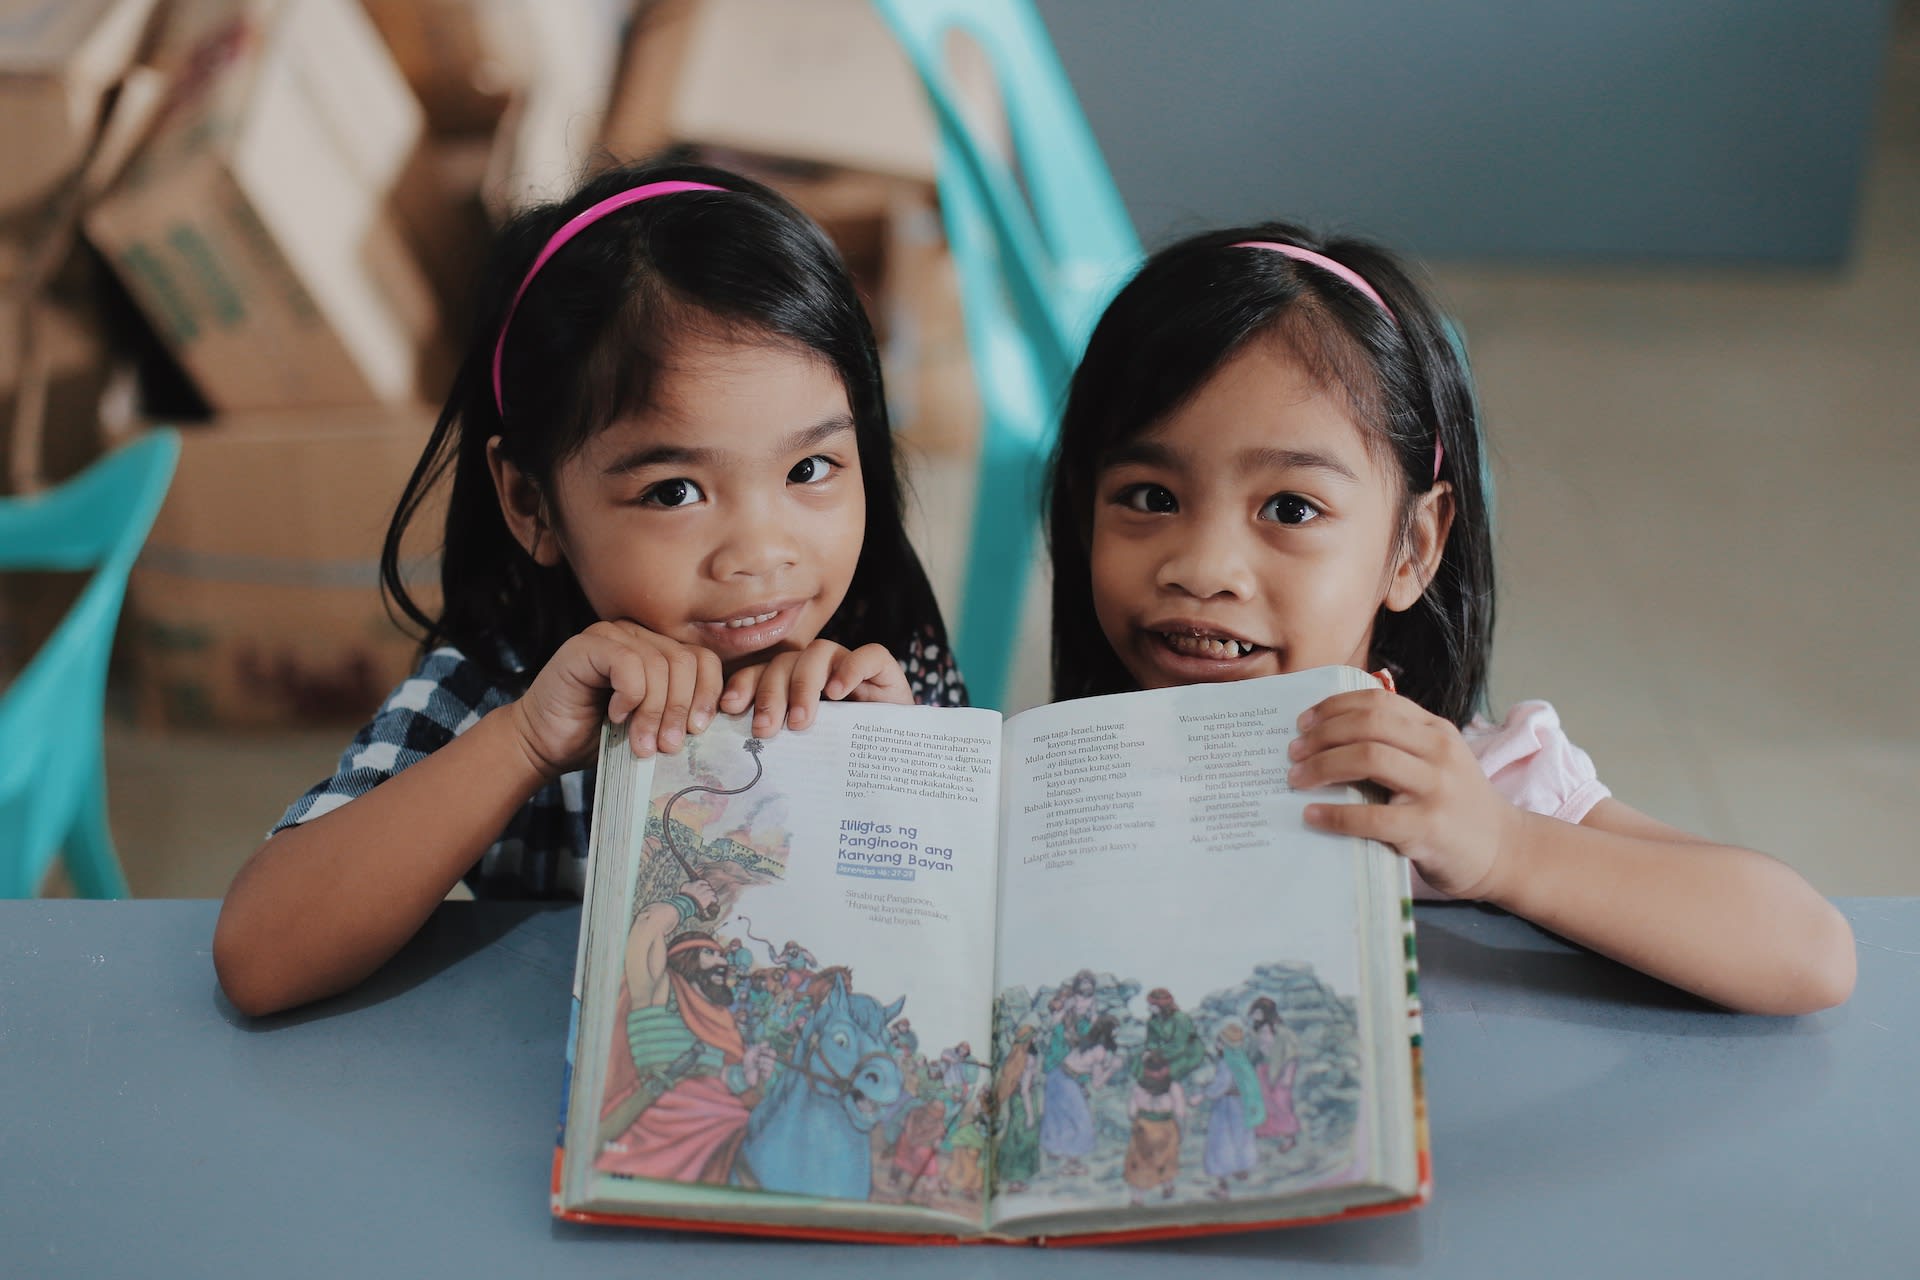 Two little girls smile as they read the Bible together